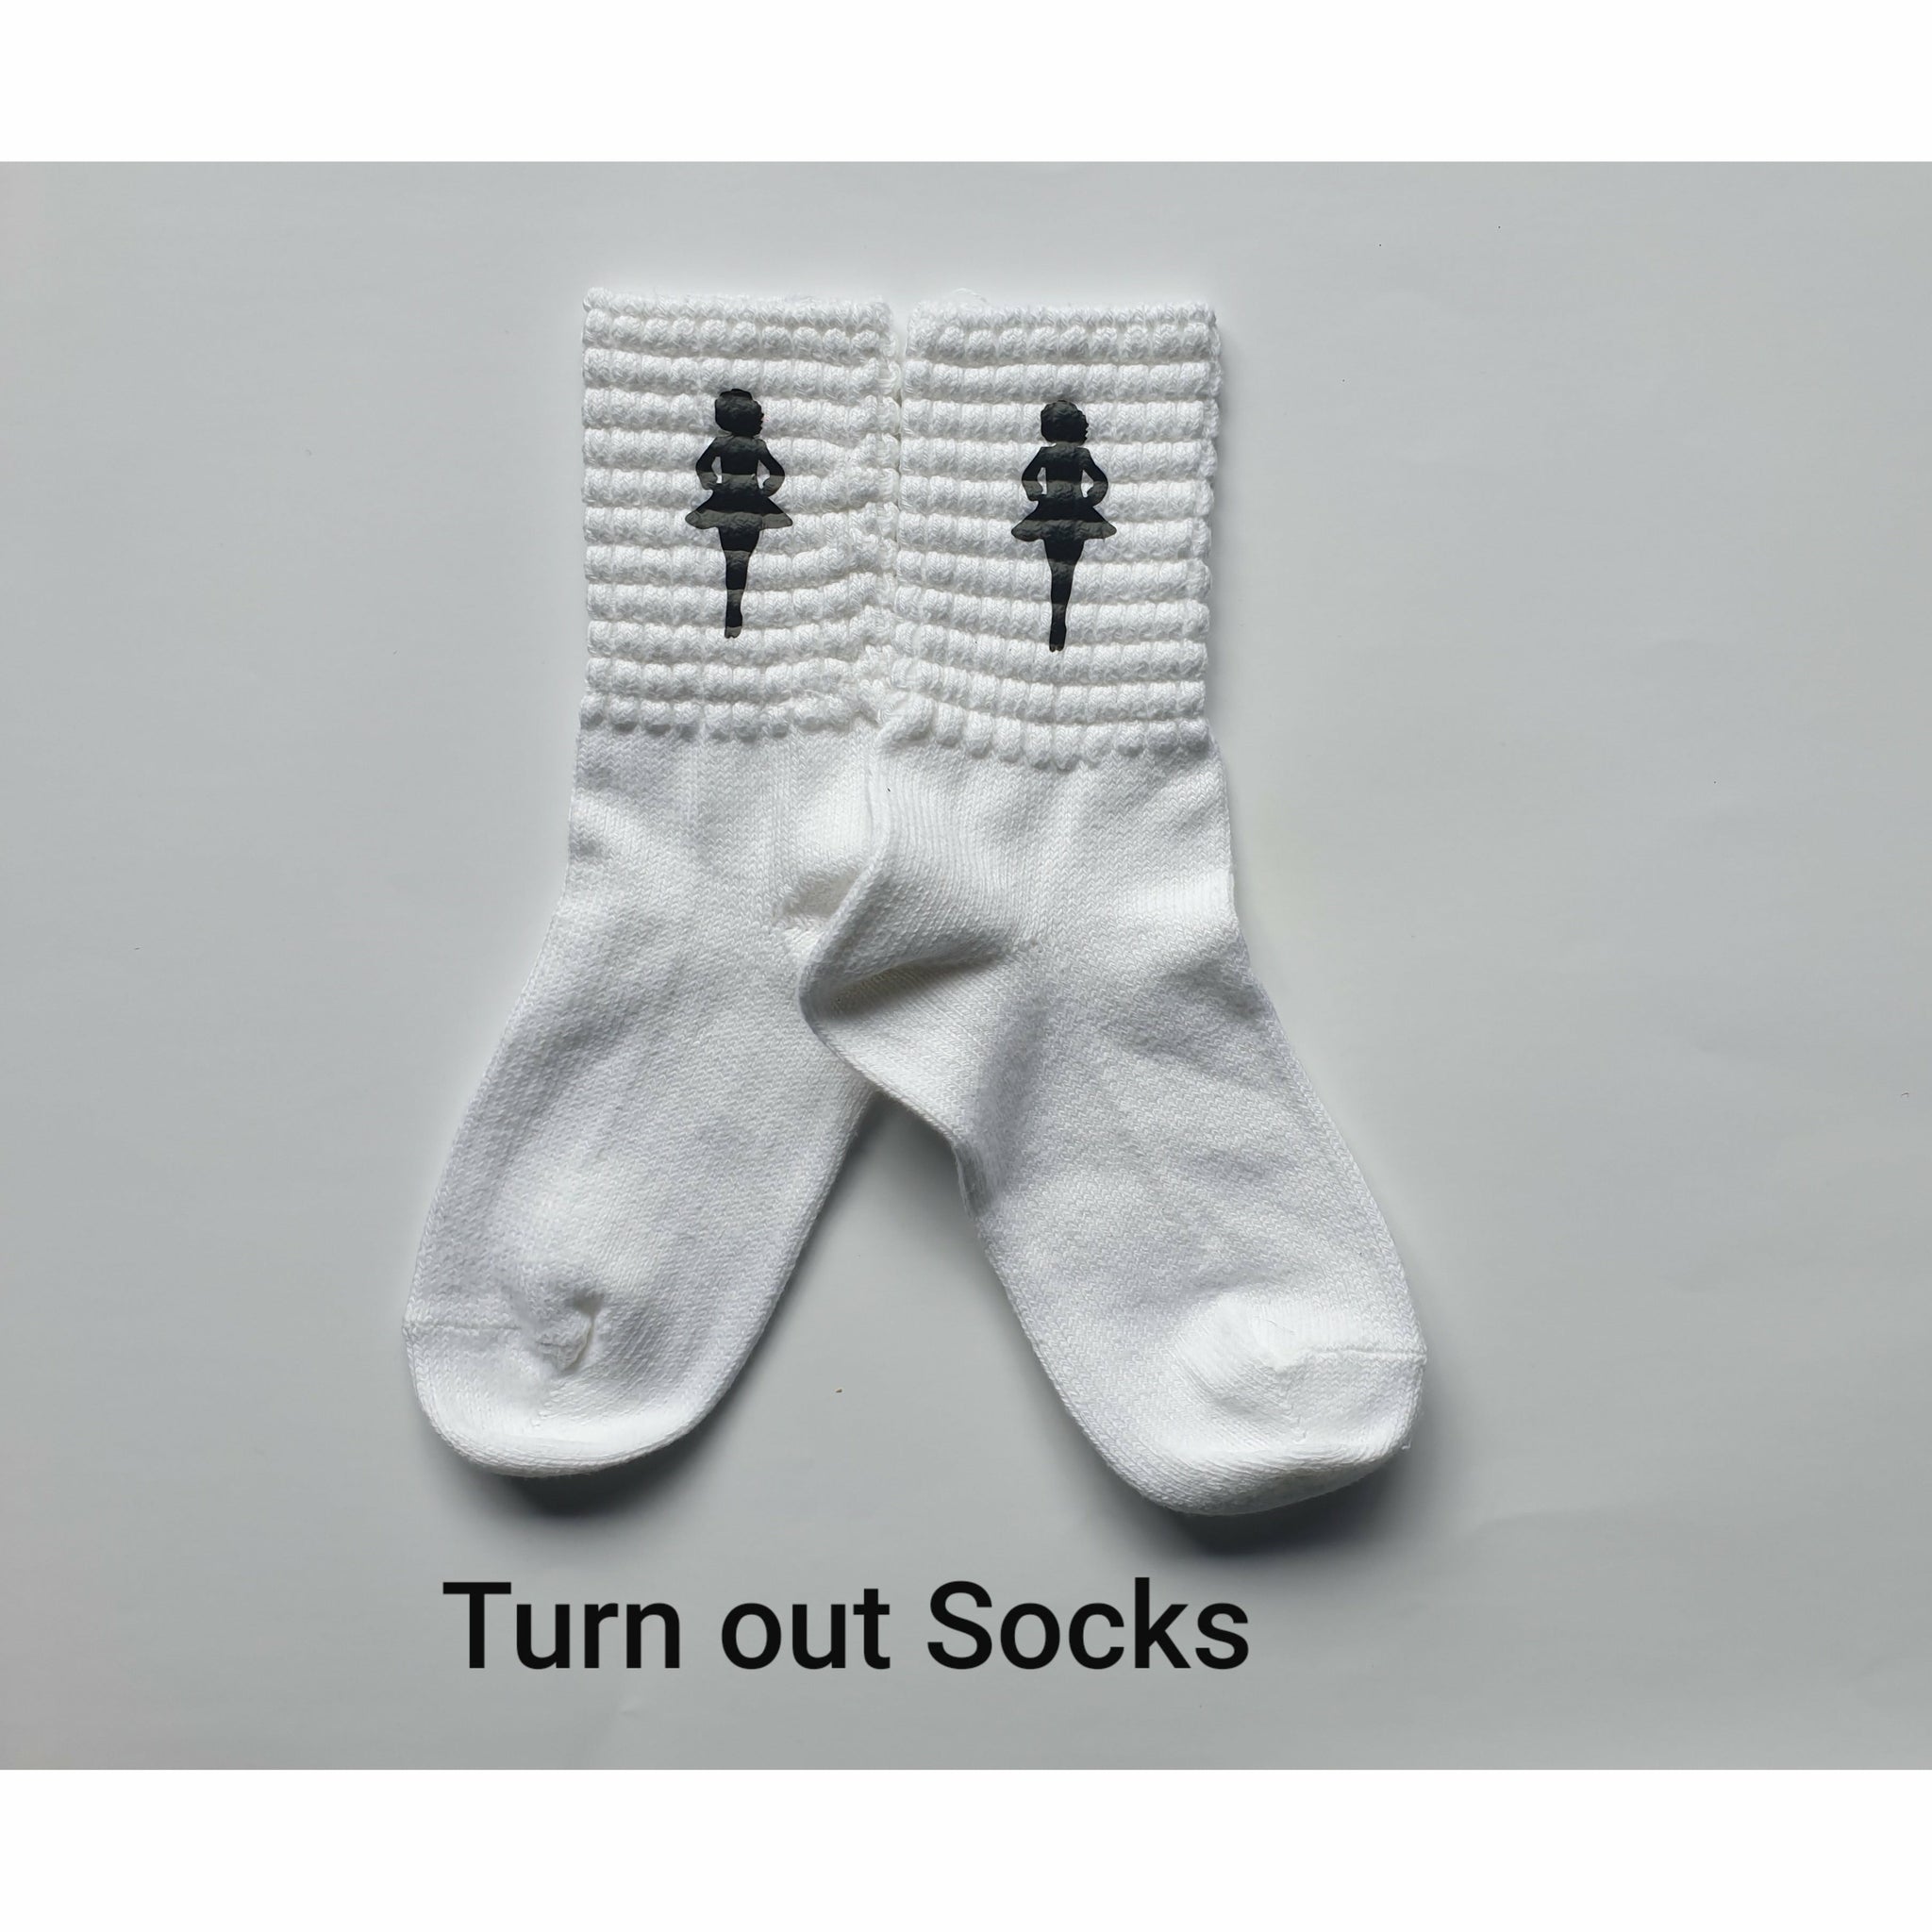 NEW! Socks– Talking Out Of Turn